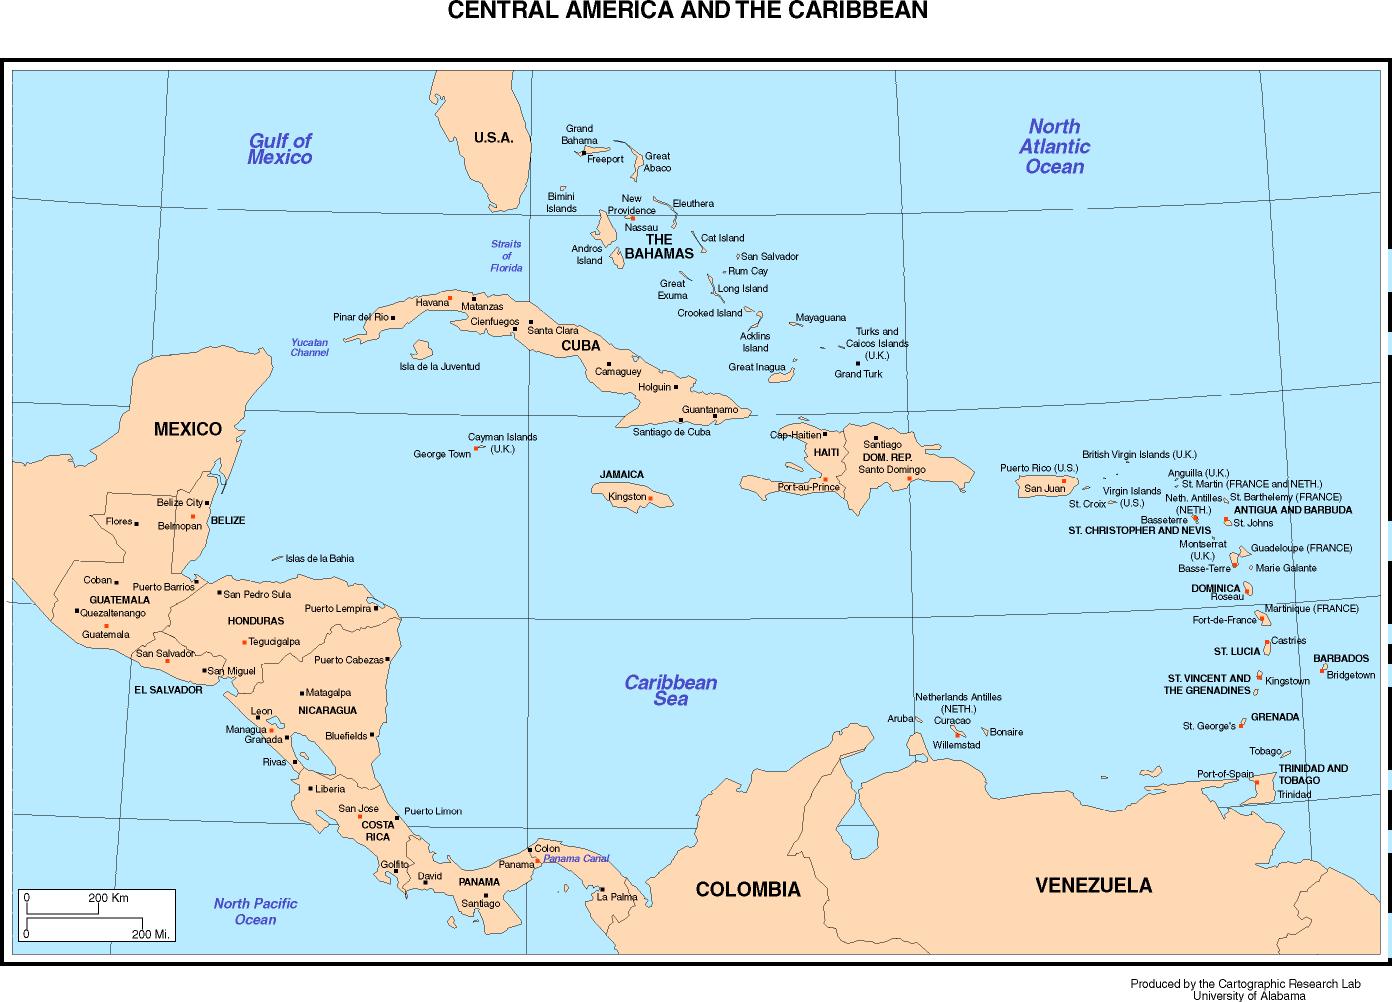 Maps Of The Americas